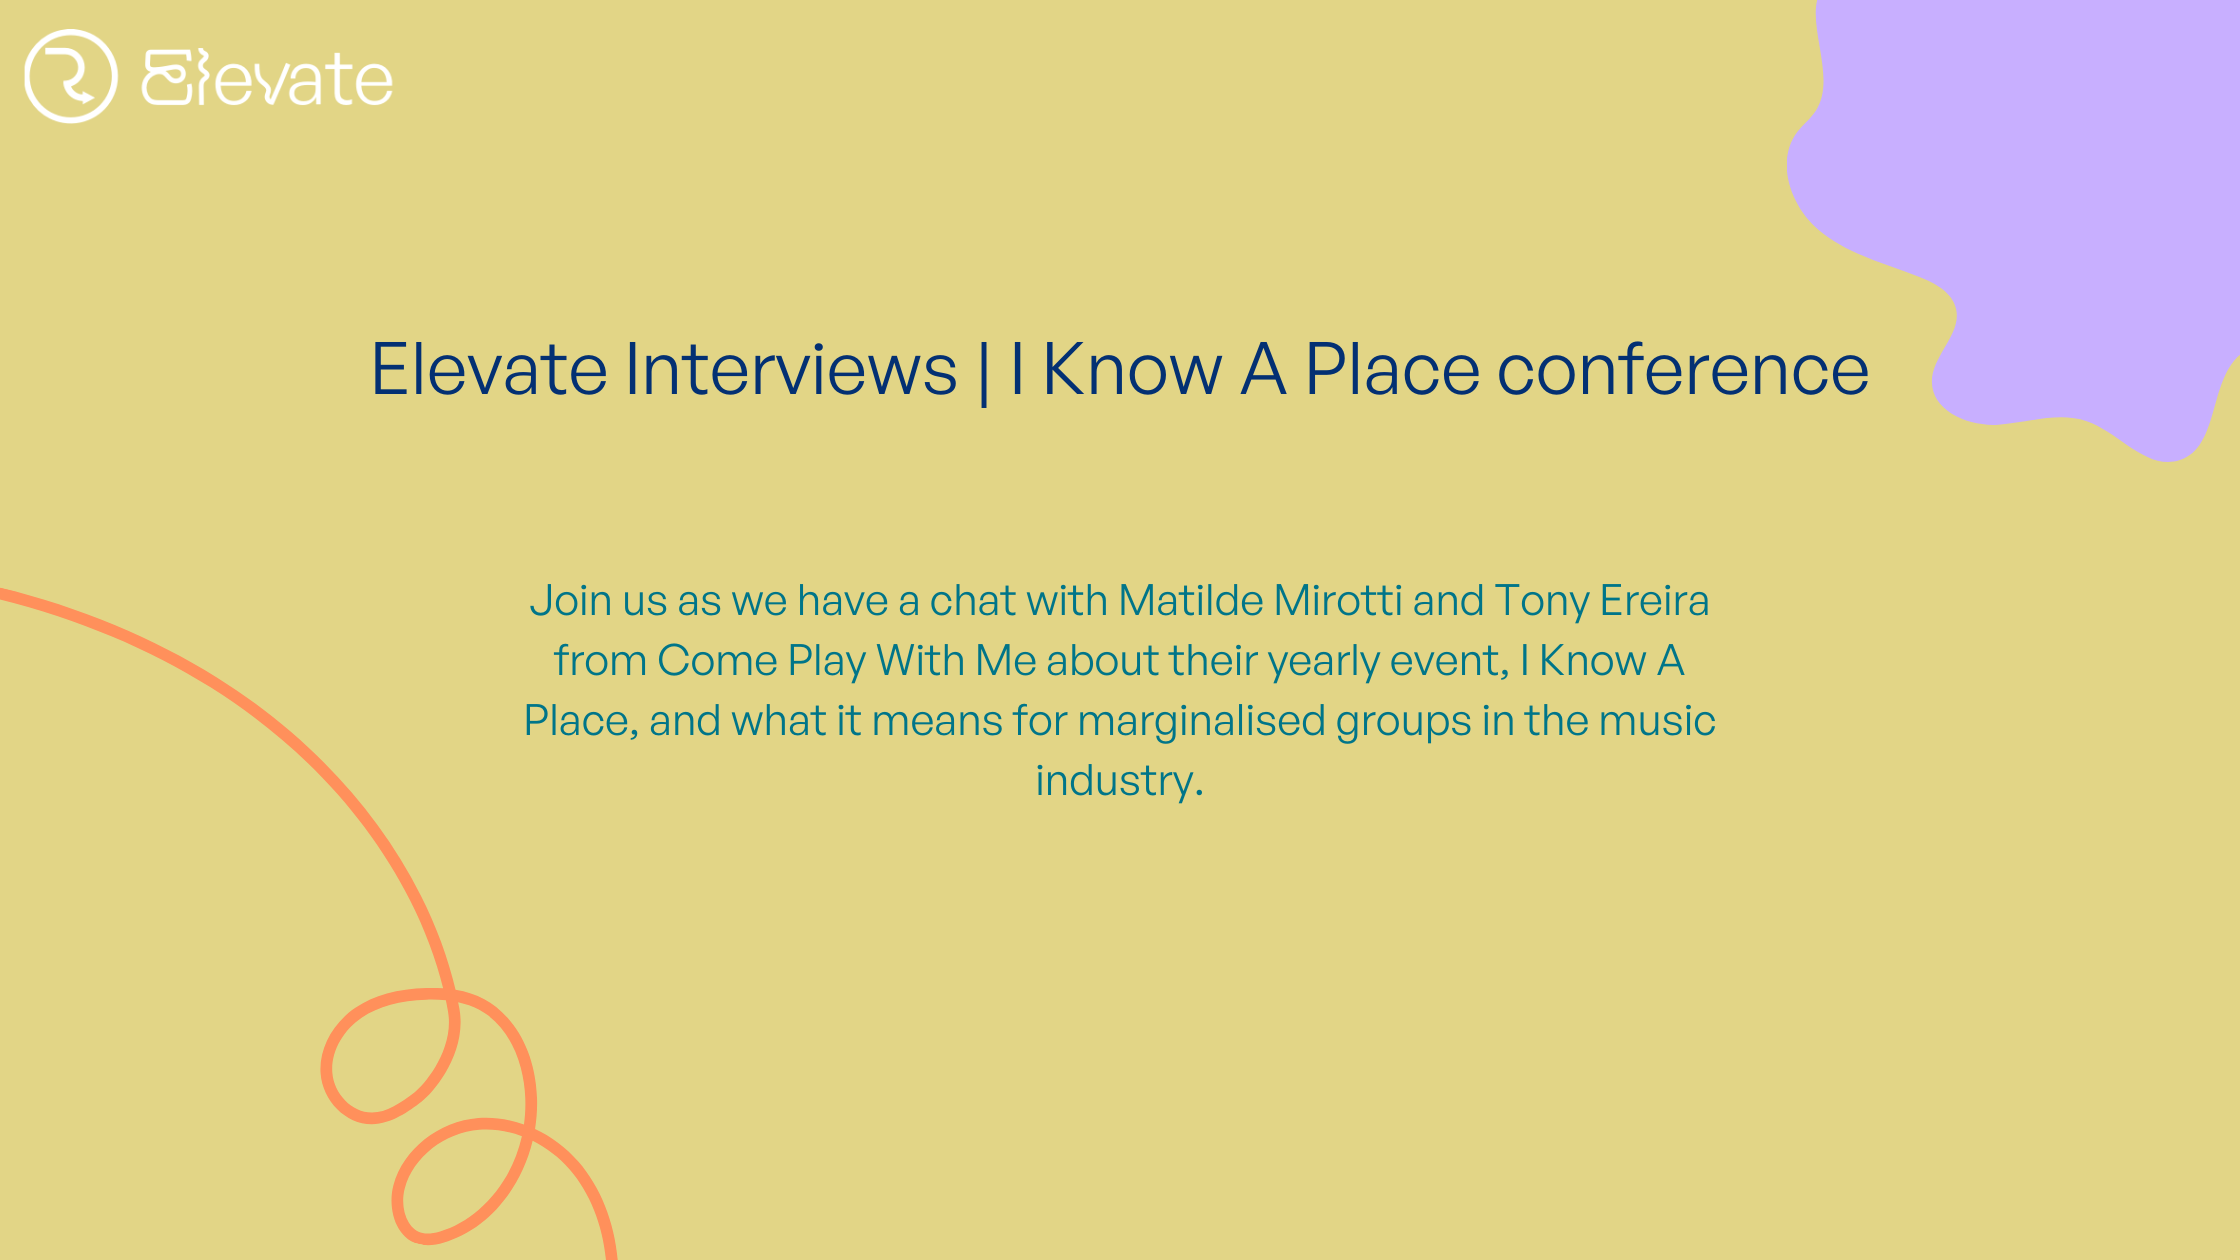 RouteNote Elevate Joins the I Know A Place Conference: Here’s What It Means for Music Enthusiasts